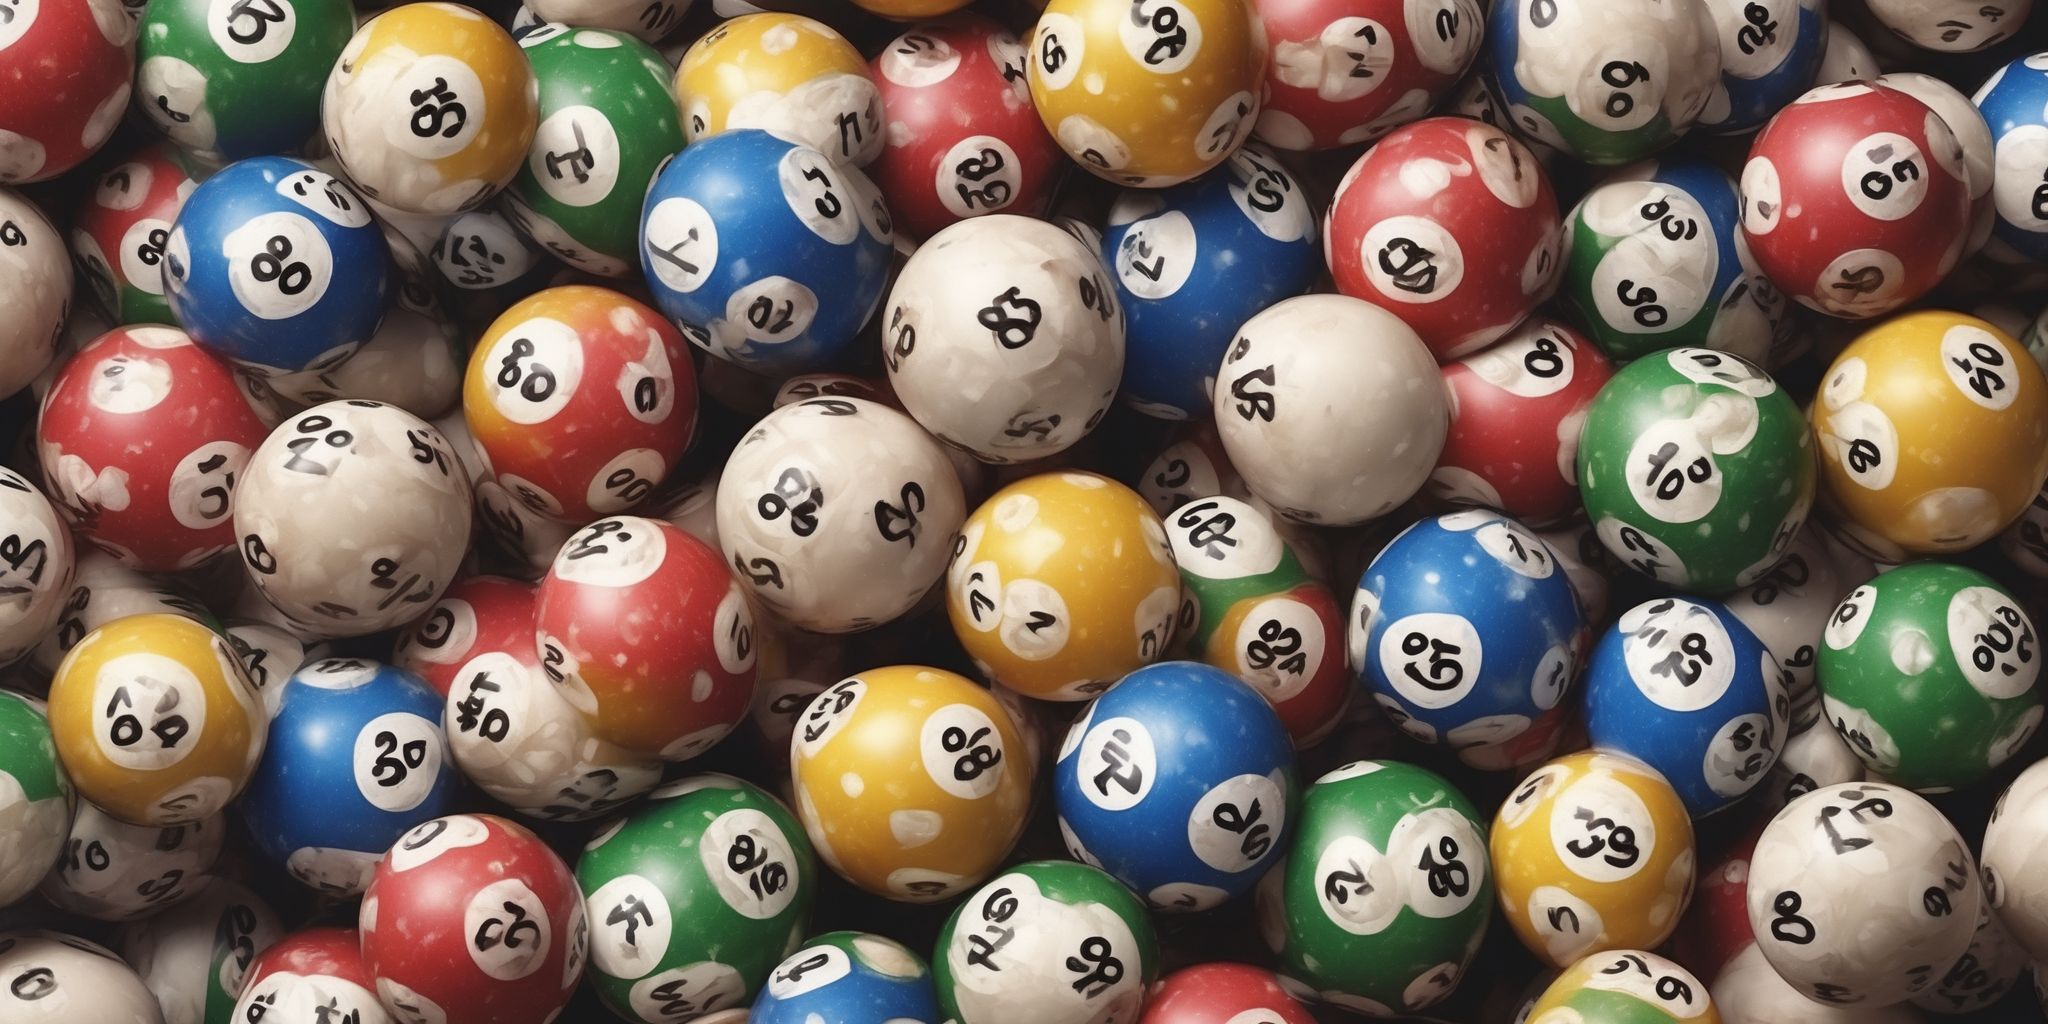 Lottery  in realistic, photographic style